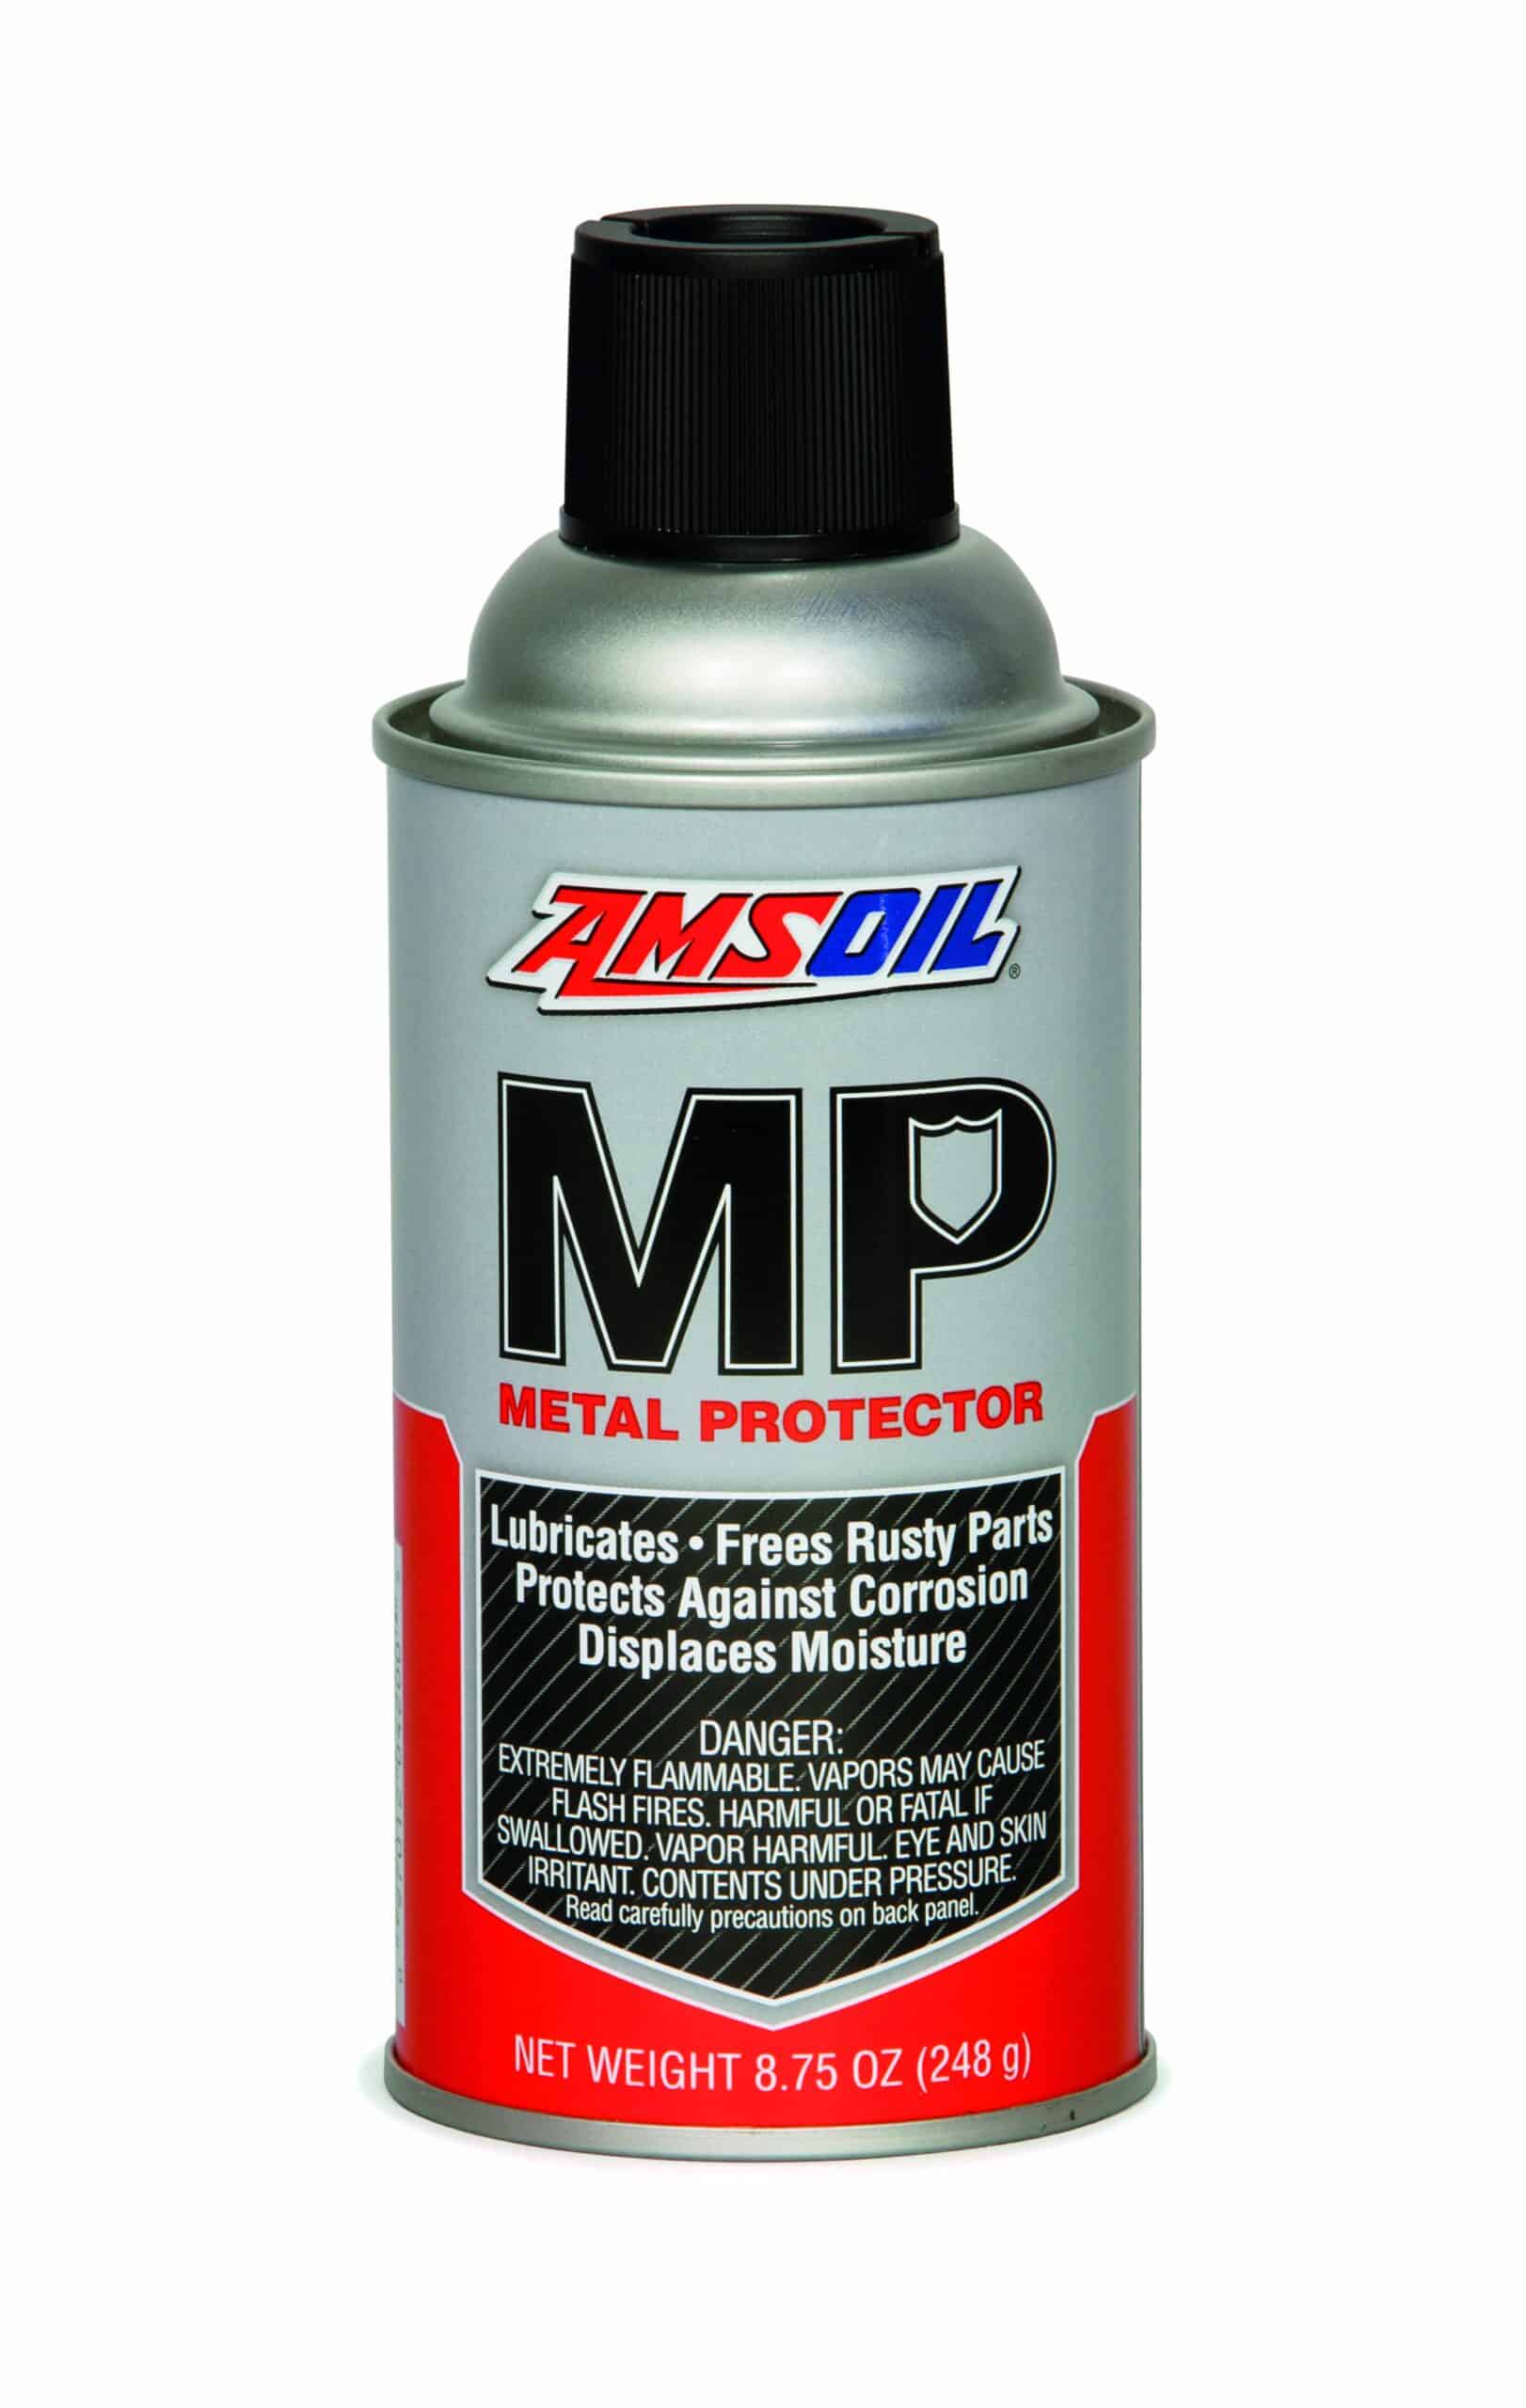 A can of AMSOIL Metal Protector - an easy-to-use spray-on product that lubricates, displaces moisture, prevents corrosion and penetrates to free rusty parts.